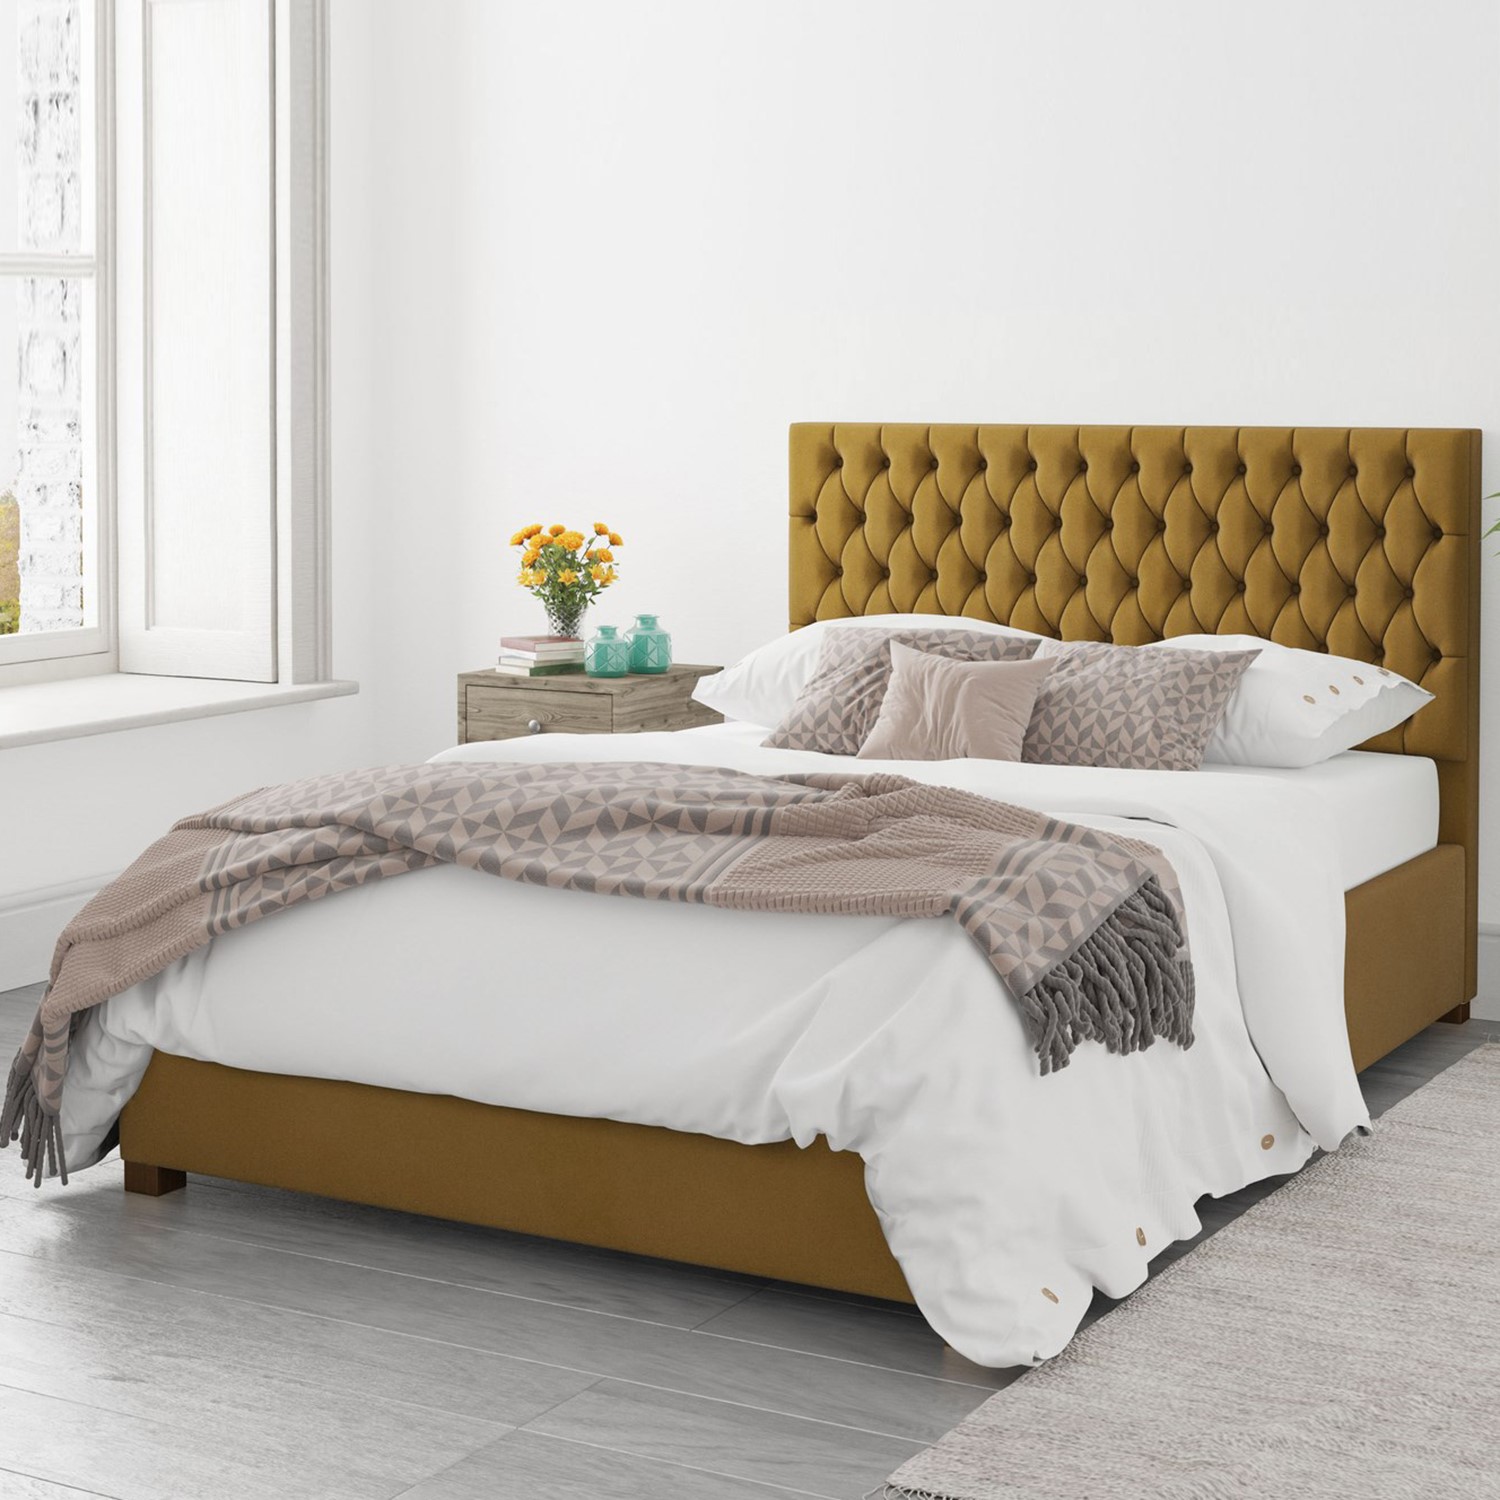 Read more about Mustard velvet double ottoman bed angel aspire